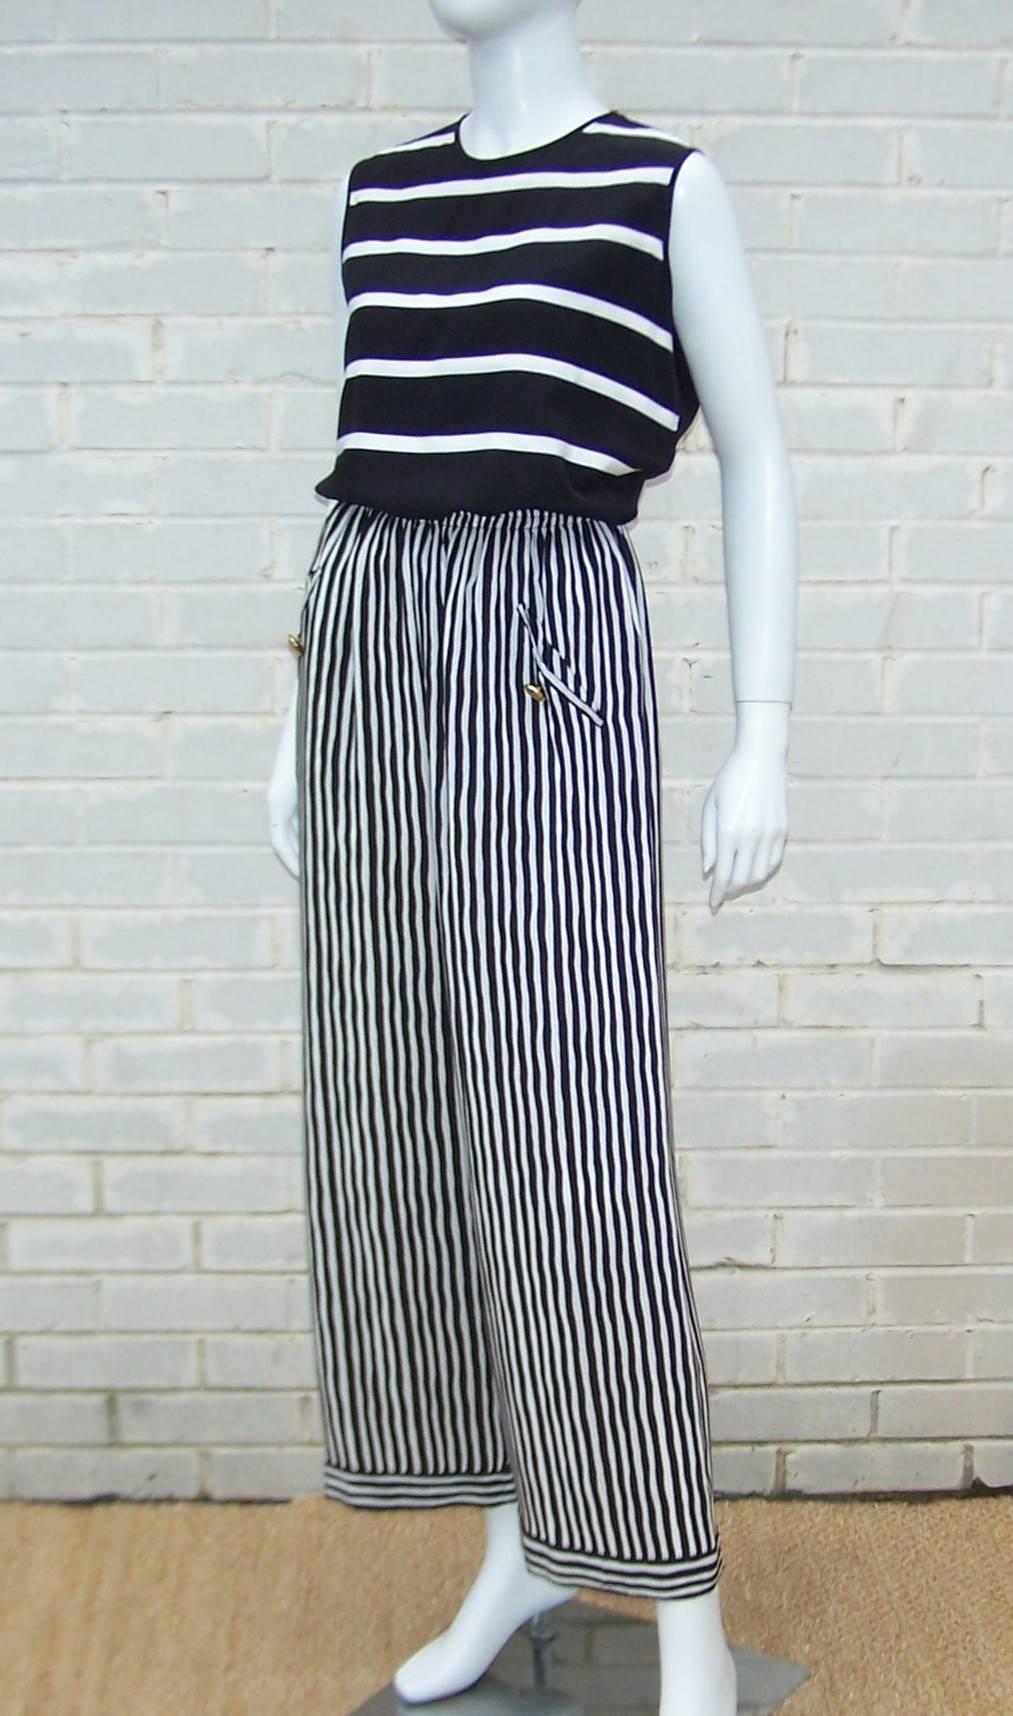 This 1970's Adolfo silk ensemble is a great combination of graphic stripe design and comfortable construction.  The simple black and white sleeveless top buttons at the back with an exaggerated keyhole neckline and acts as the perfect foil to pull